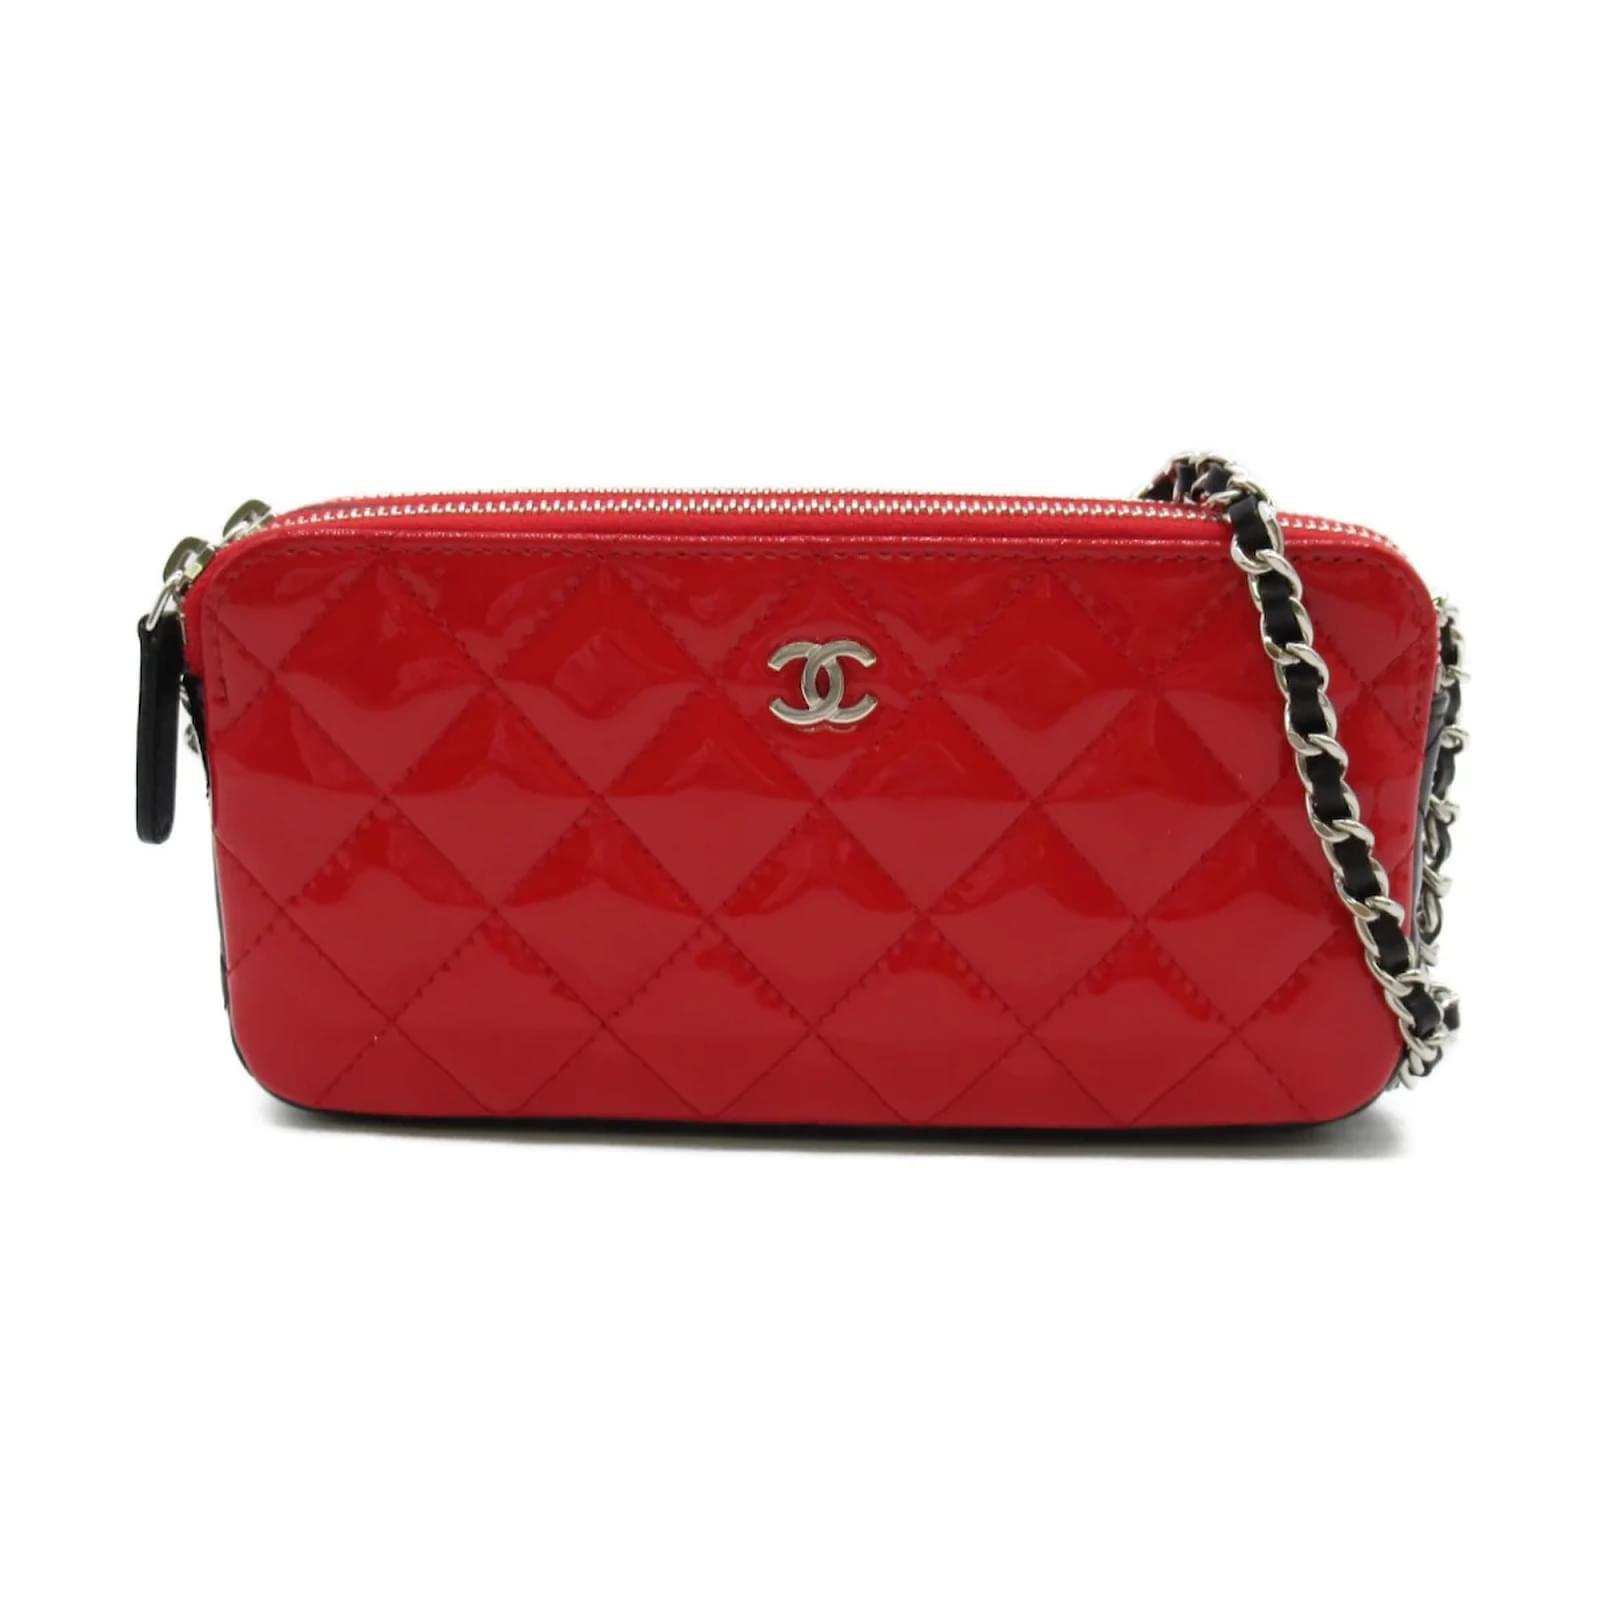 Chanel WOC Patent Leather Wallet On Chain Clutch Bag Red